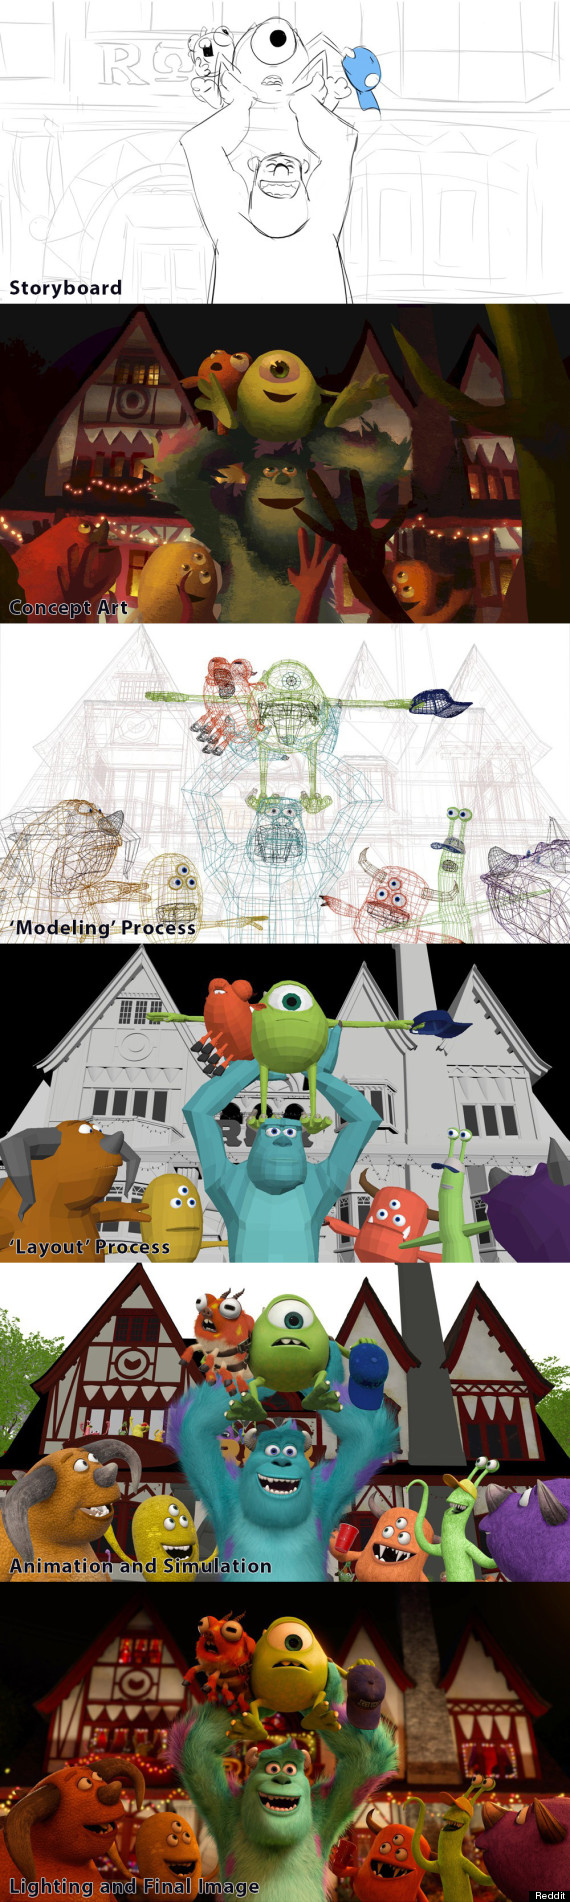 How Disney Pixar Movies Are Made, As Told By Reddit | HuffPost Entertainment